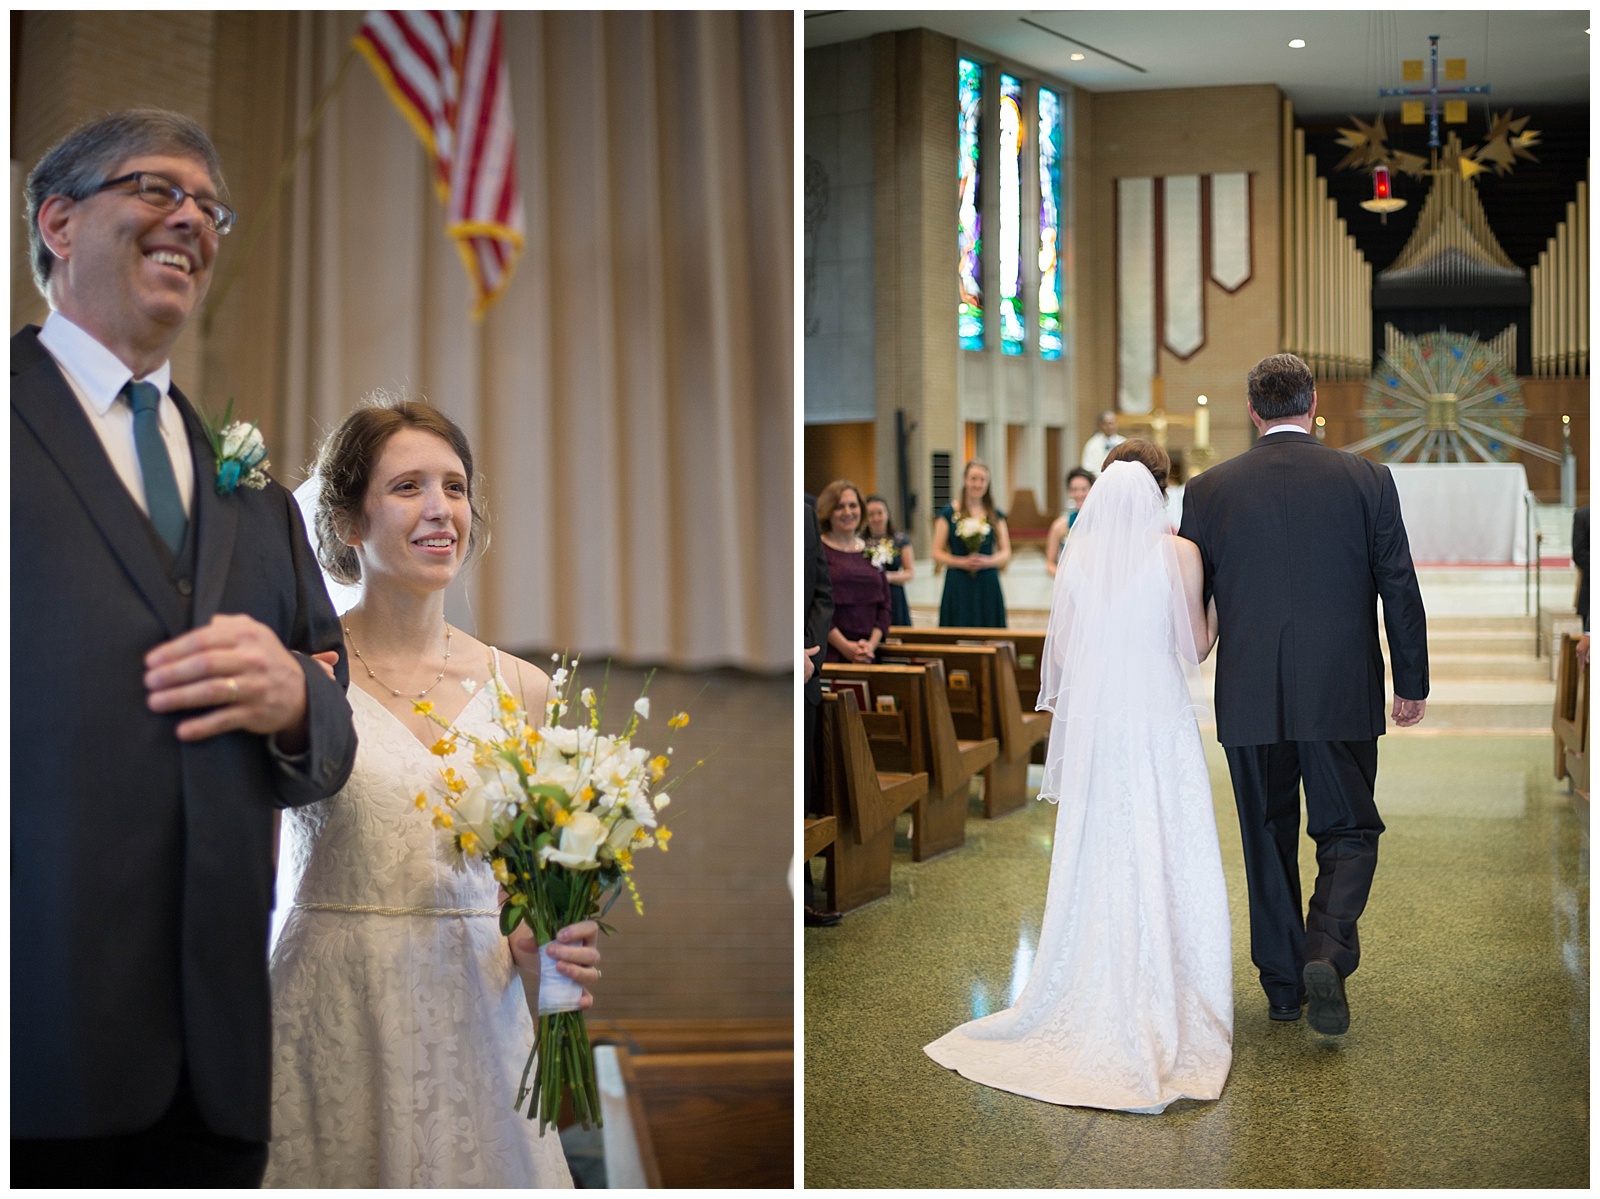 Romantic Wedding in Dayton, Ohio. Father Daughter | Monica Brown Photography | monicabrownphoto.com